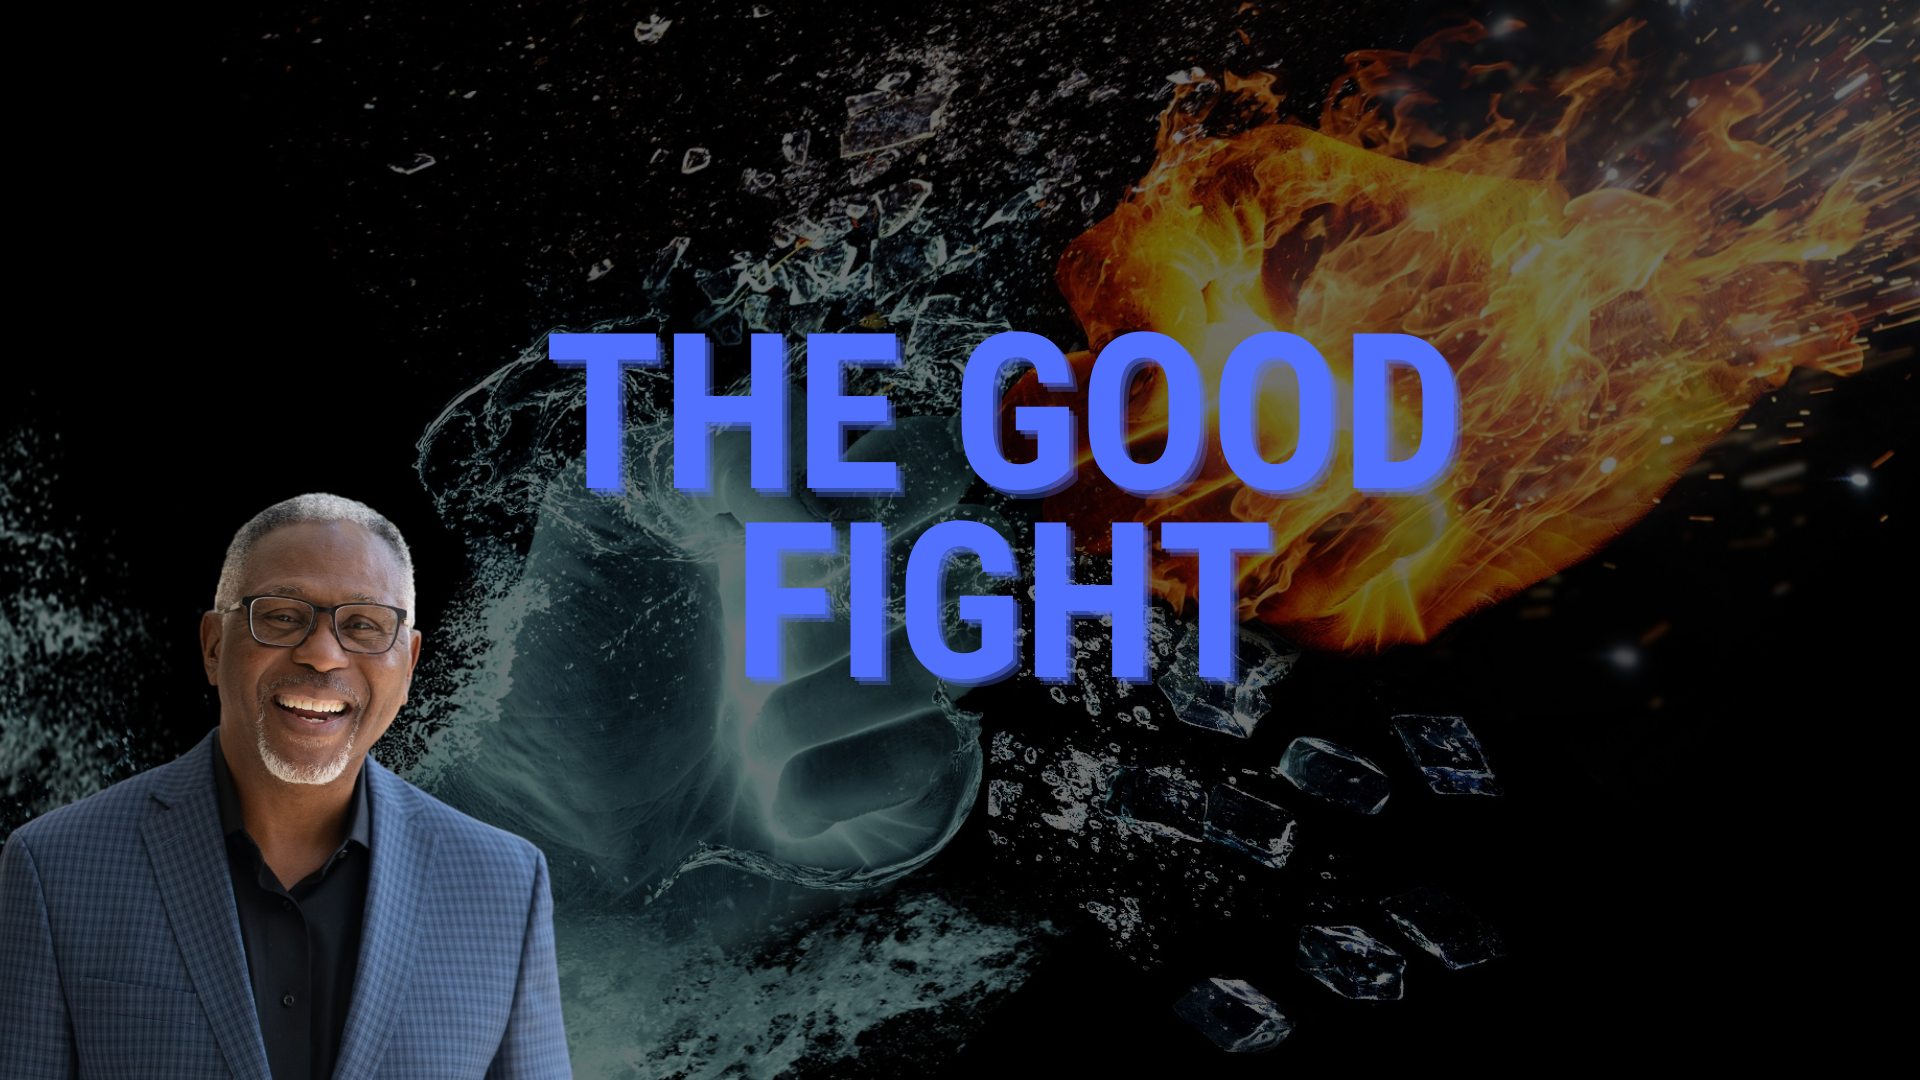 The Good Fight head image